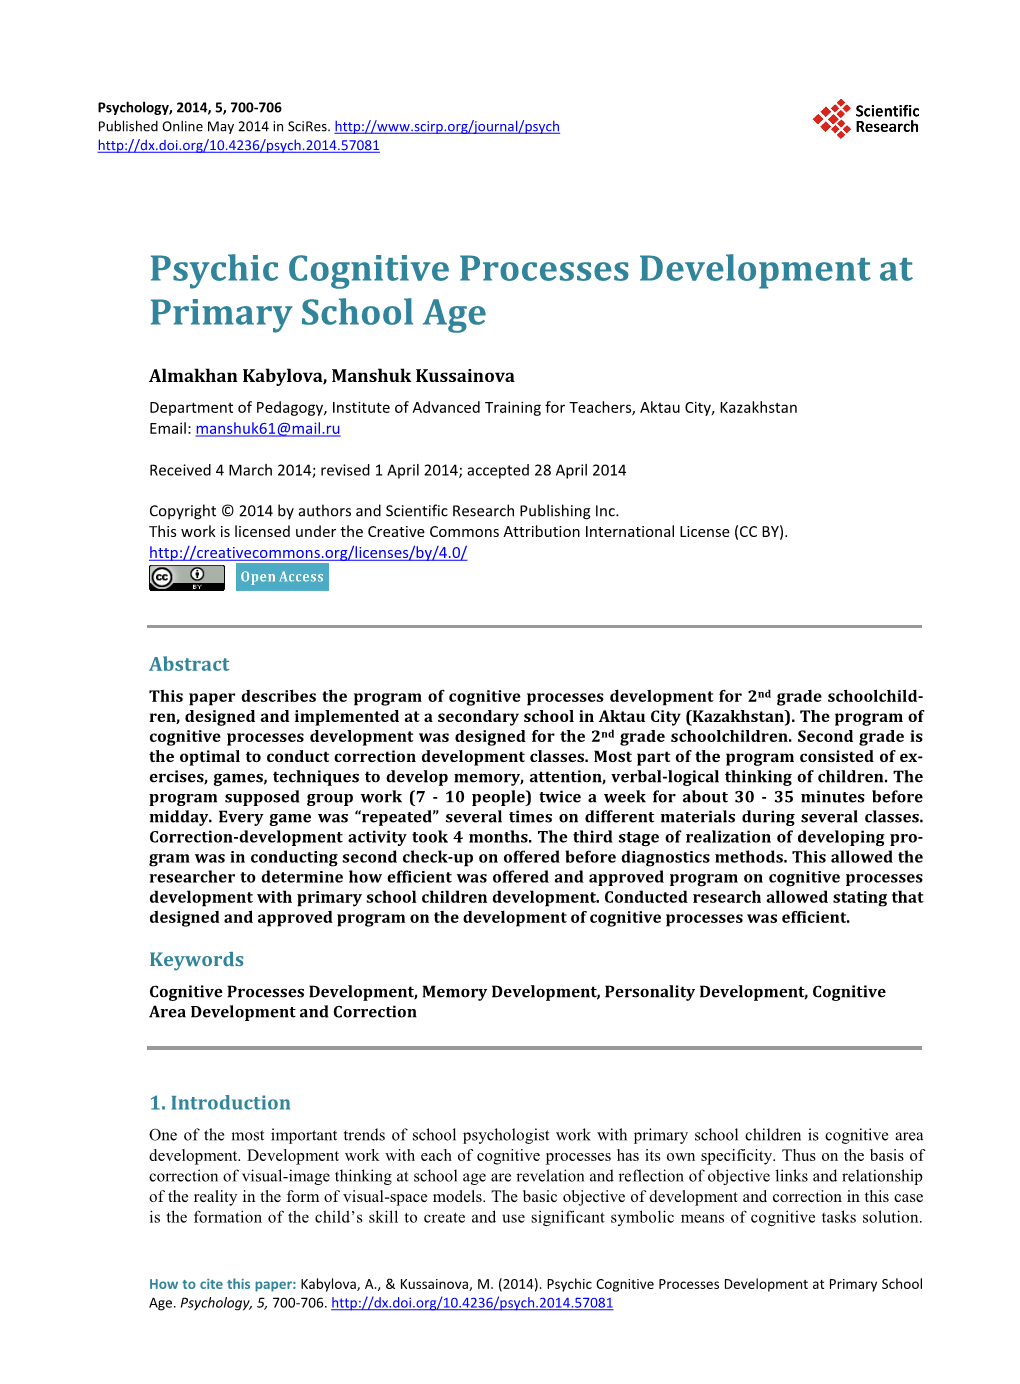 Psychic Cognitive Processes Development at Primary School Age